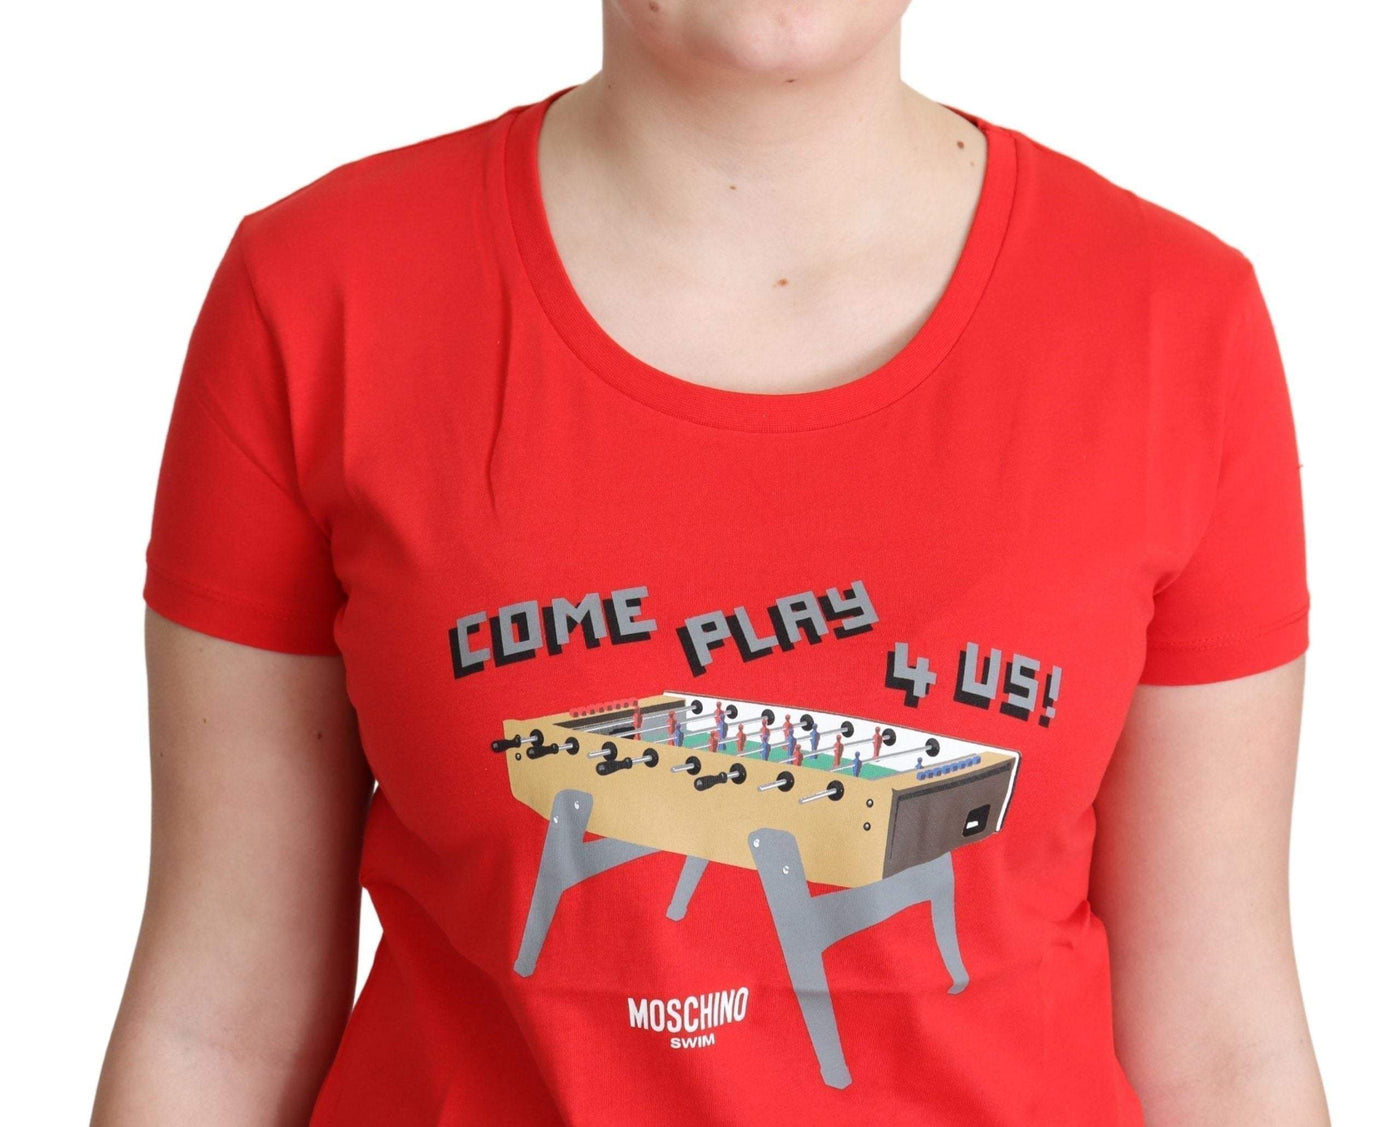 Moschino Red Cotton Come Play 4 Us Print Tops Blouse T-shirt #women, feed-agegroup-adult, feed-color-Red, feed-gender-female, IT40|S, IT42|M, IT44|L, IT46|XL, Moschino, Red, Tops & T-Shirts - Women - Clothing, Women - New Arrivals at SEYMAYKA